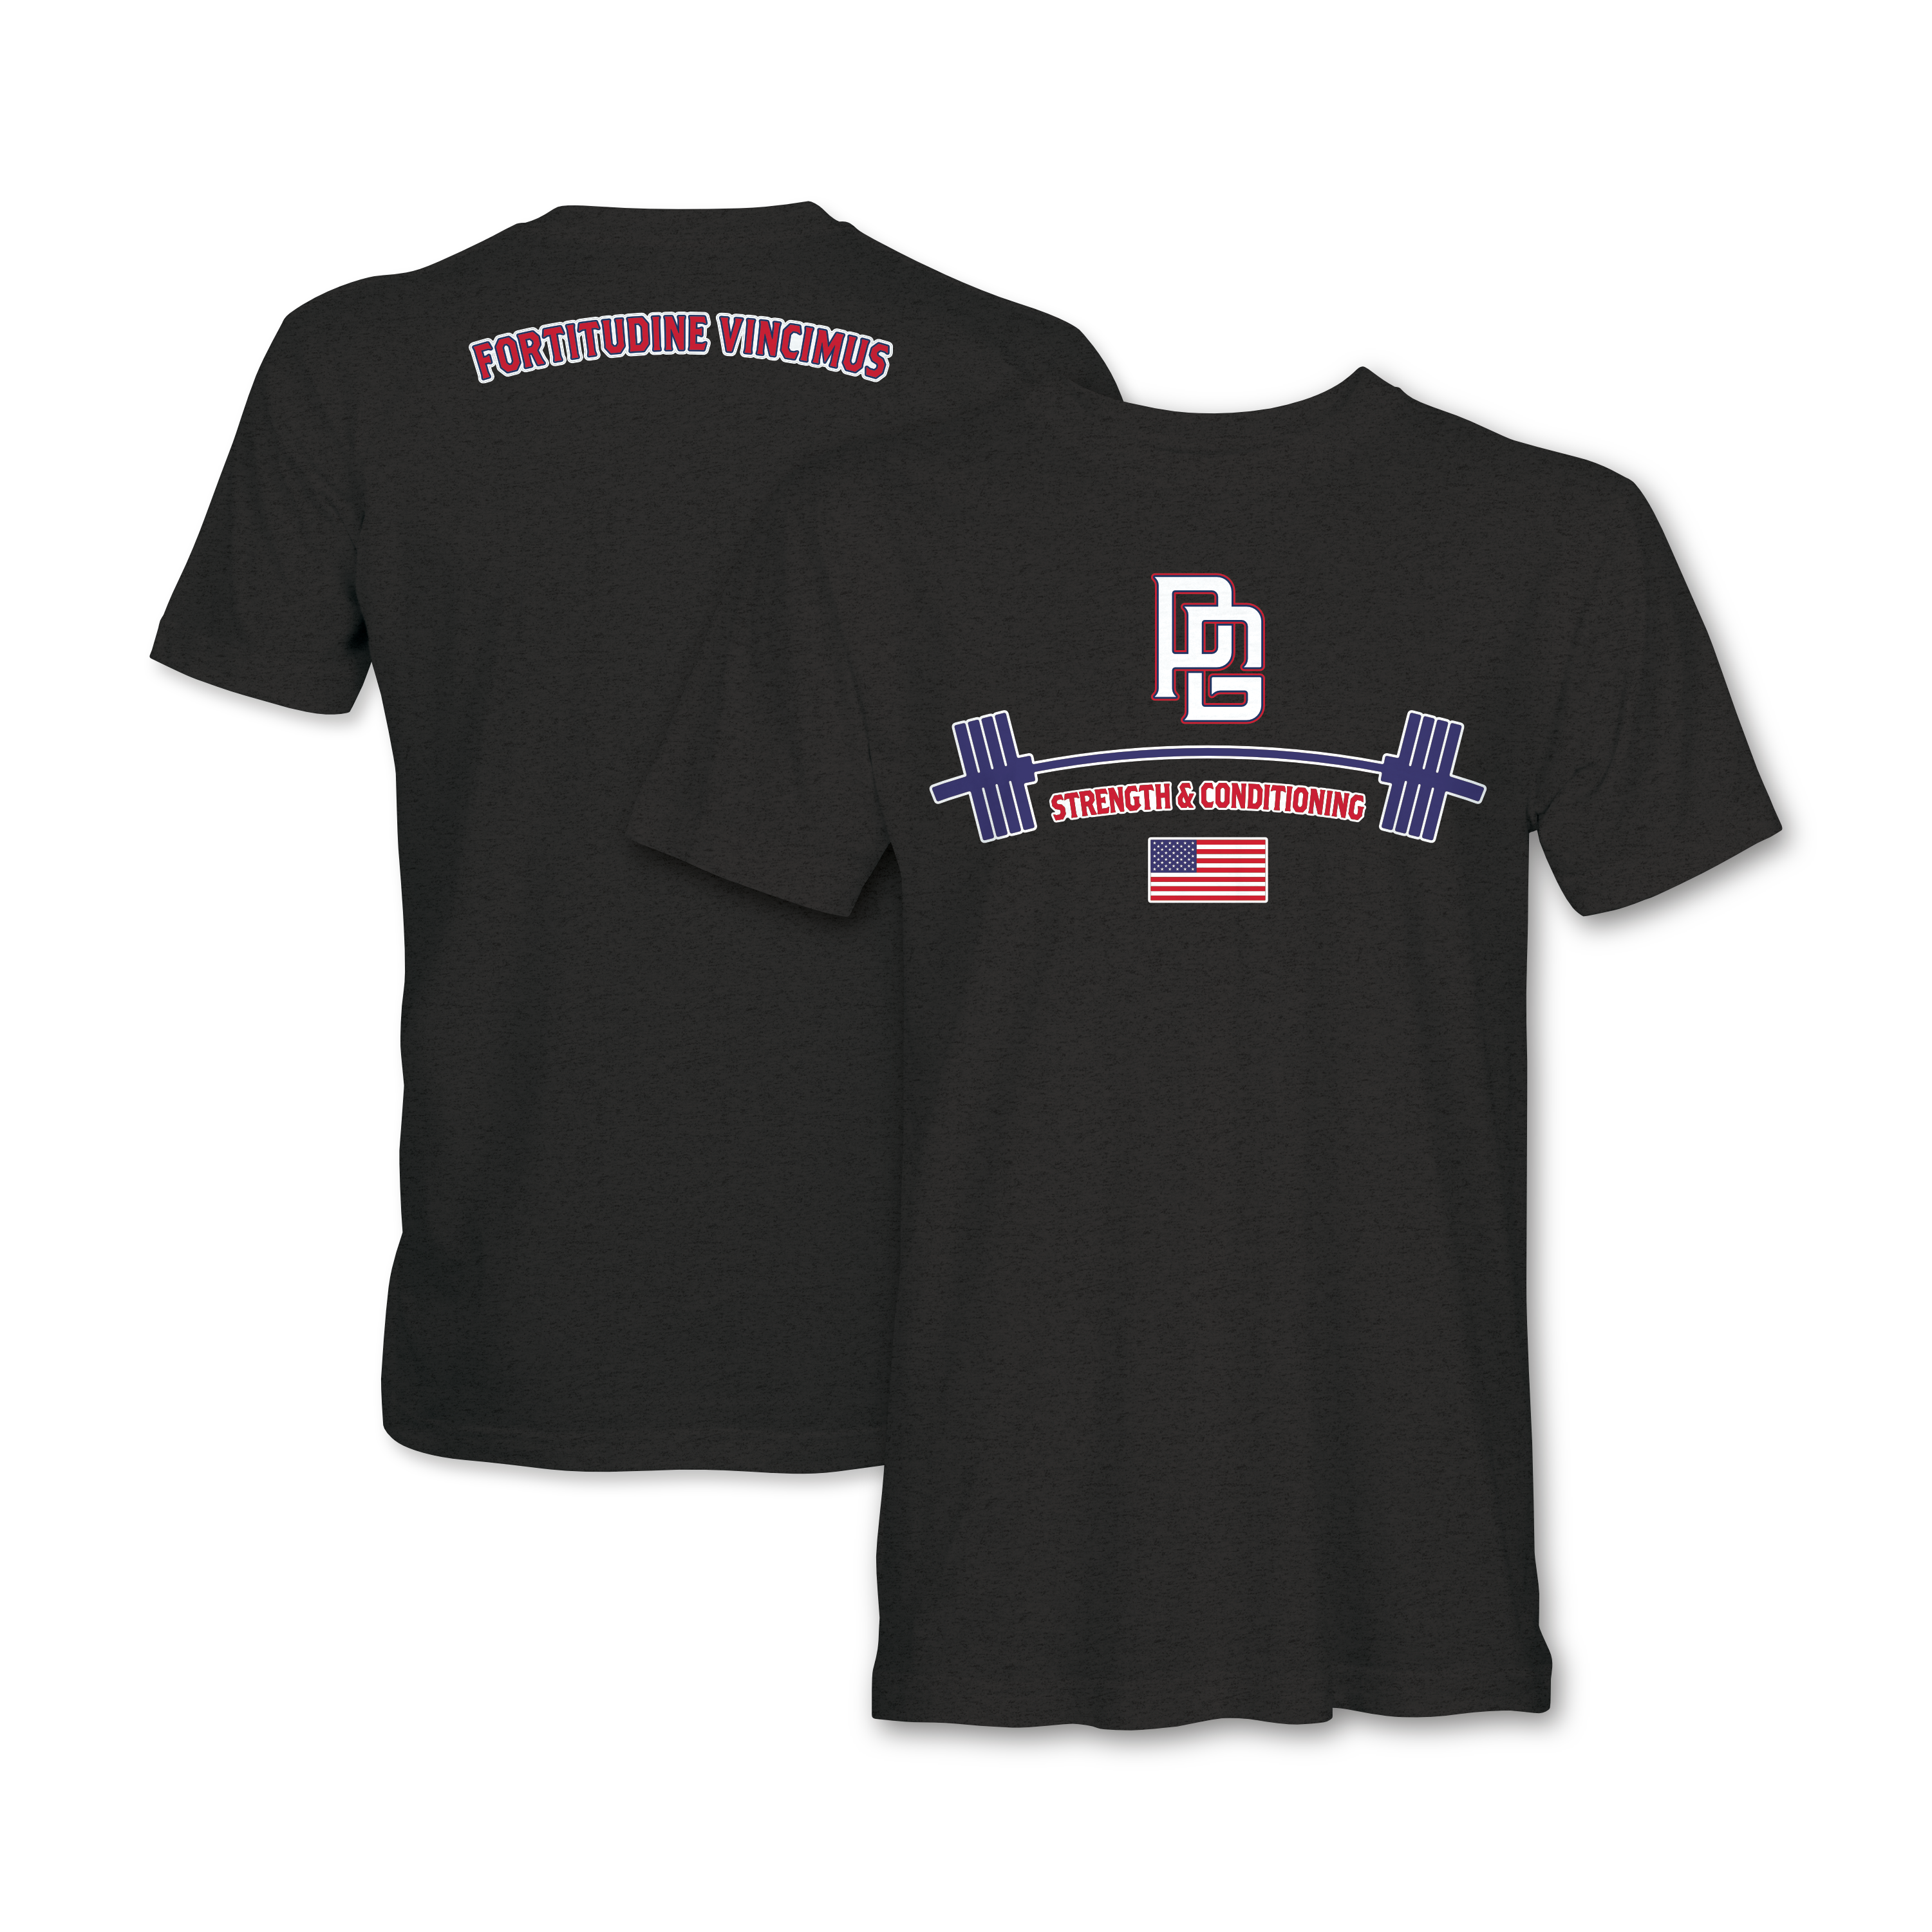 Project Guardian Strength & Conditioning – Team Shirt *PRE-ORDER*